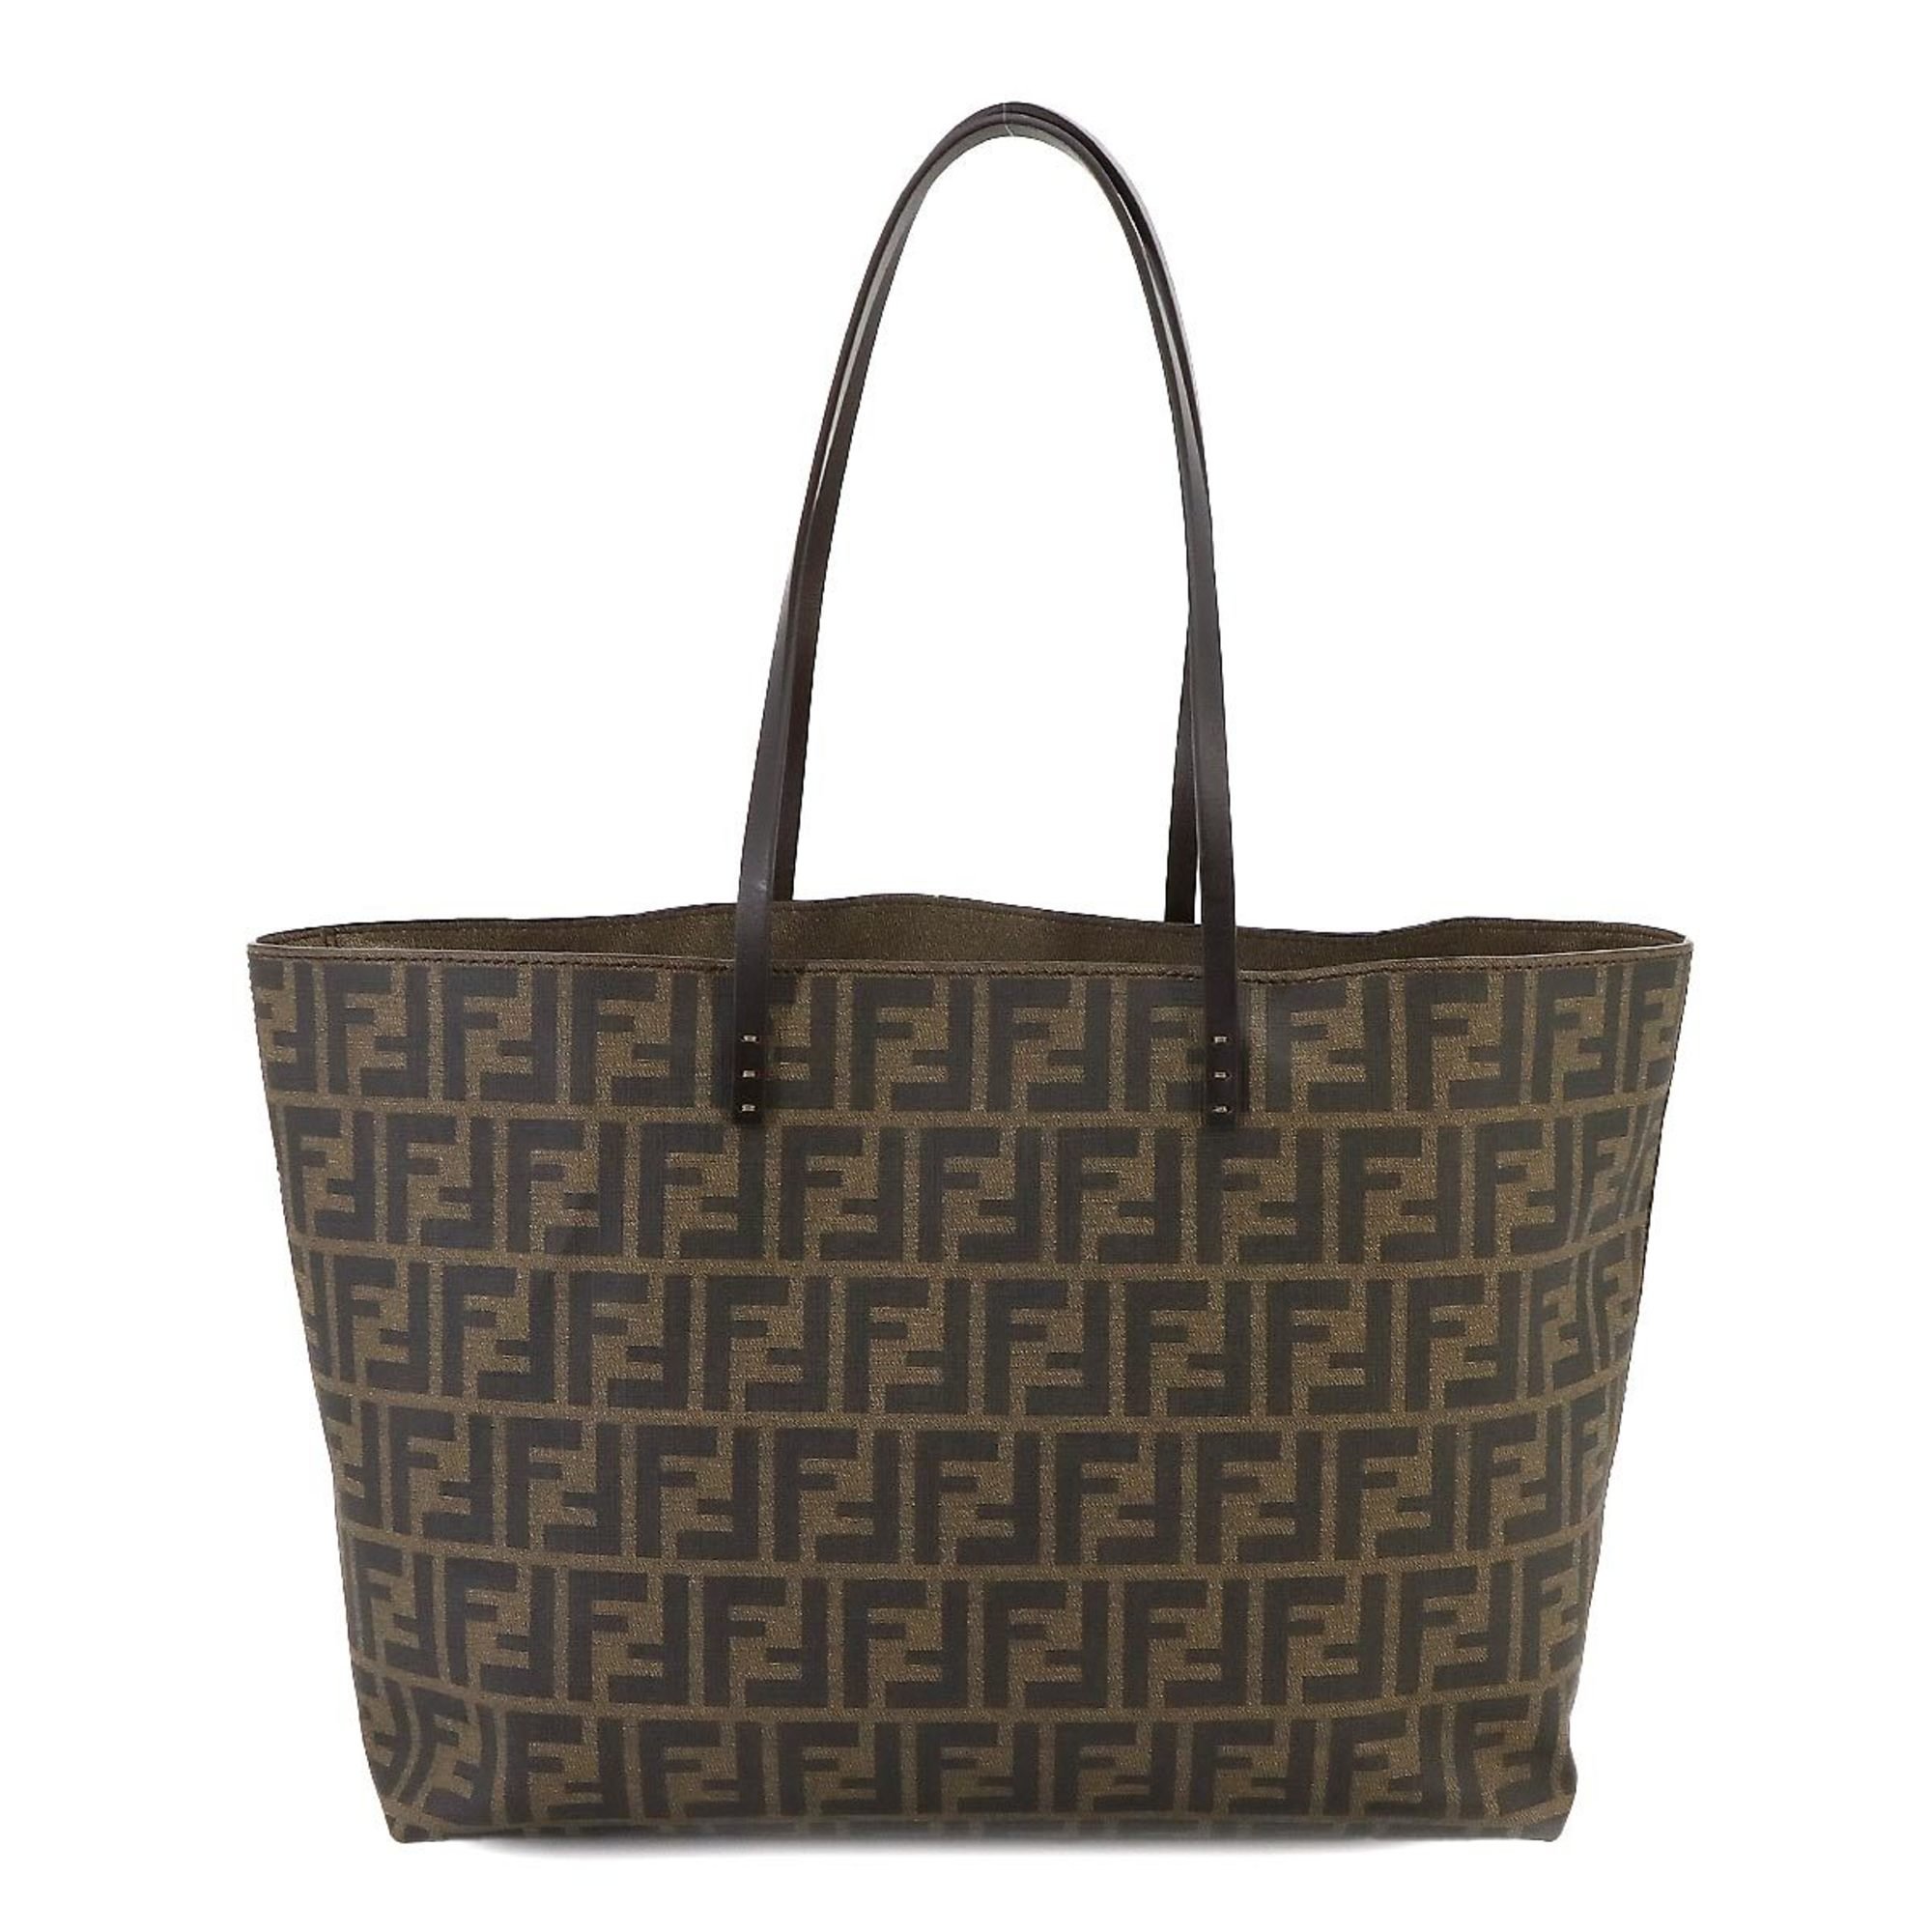 FENDI Zucca Tote Bag in brown and black with gold hardware, 8BH185